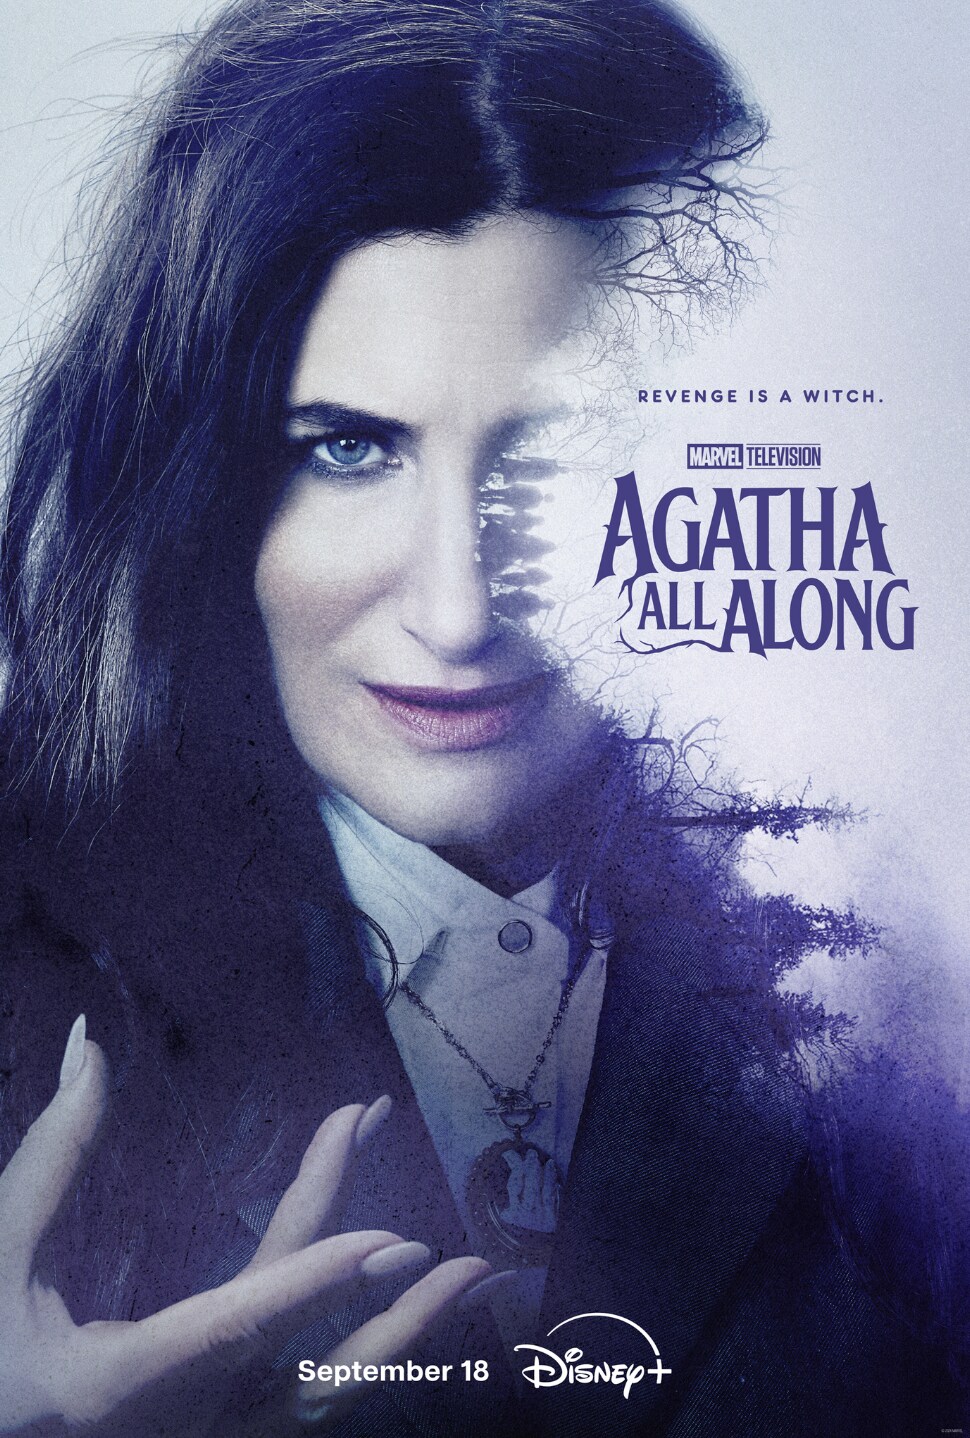 Disney+ Debuts Trailer & Key Art for Marvel Television’s New Live-Action Series “Agatha All Along”